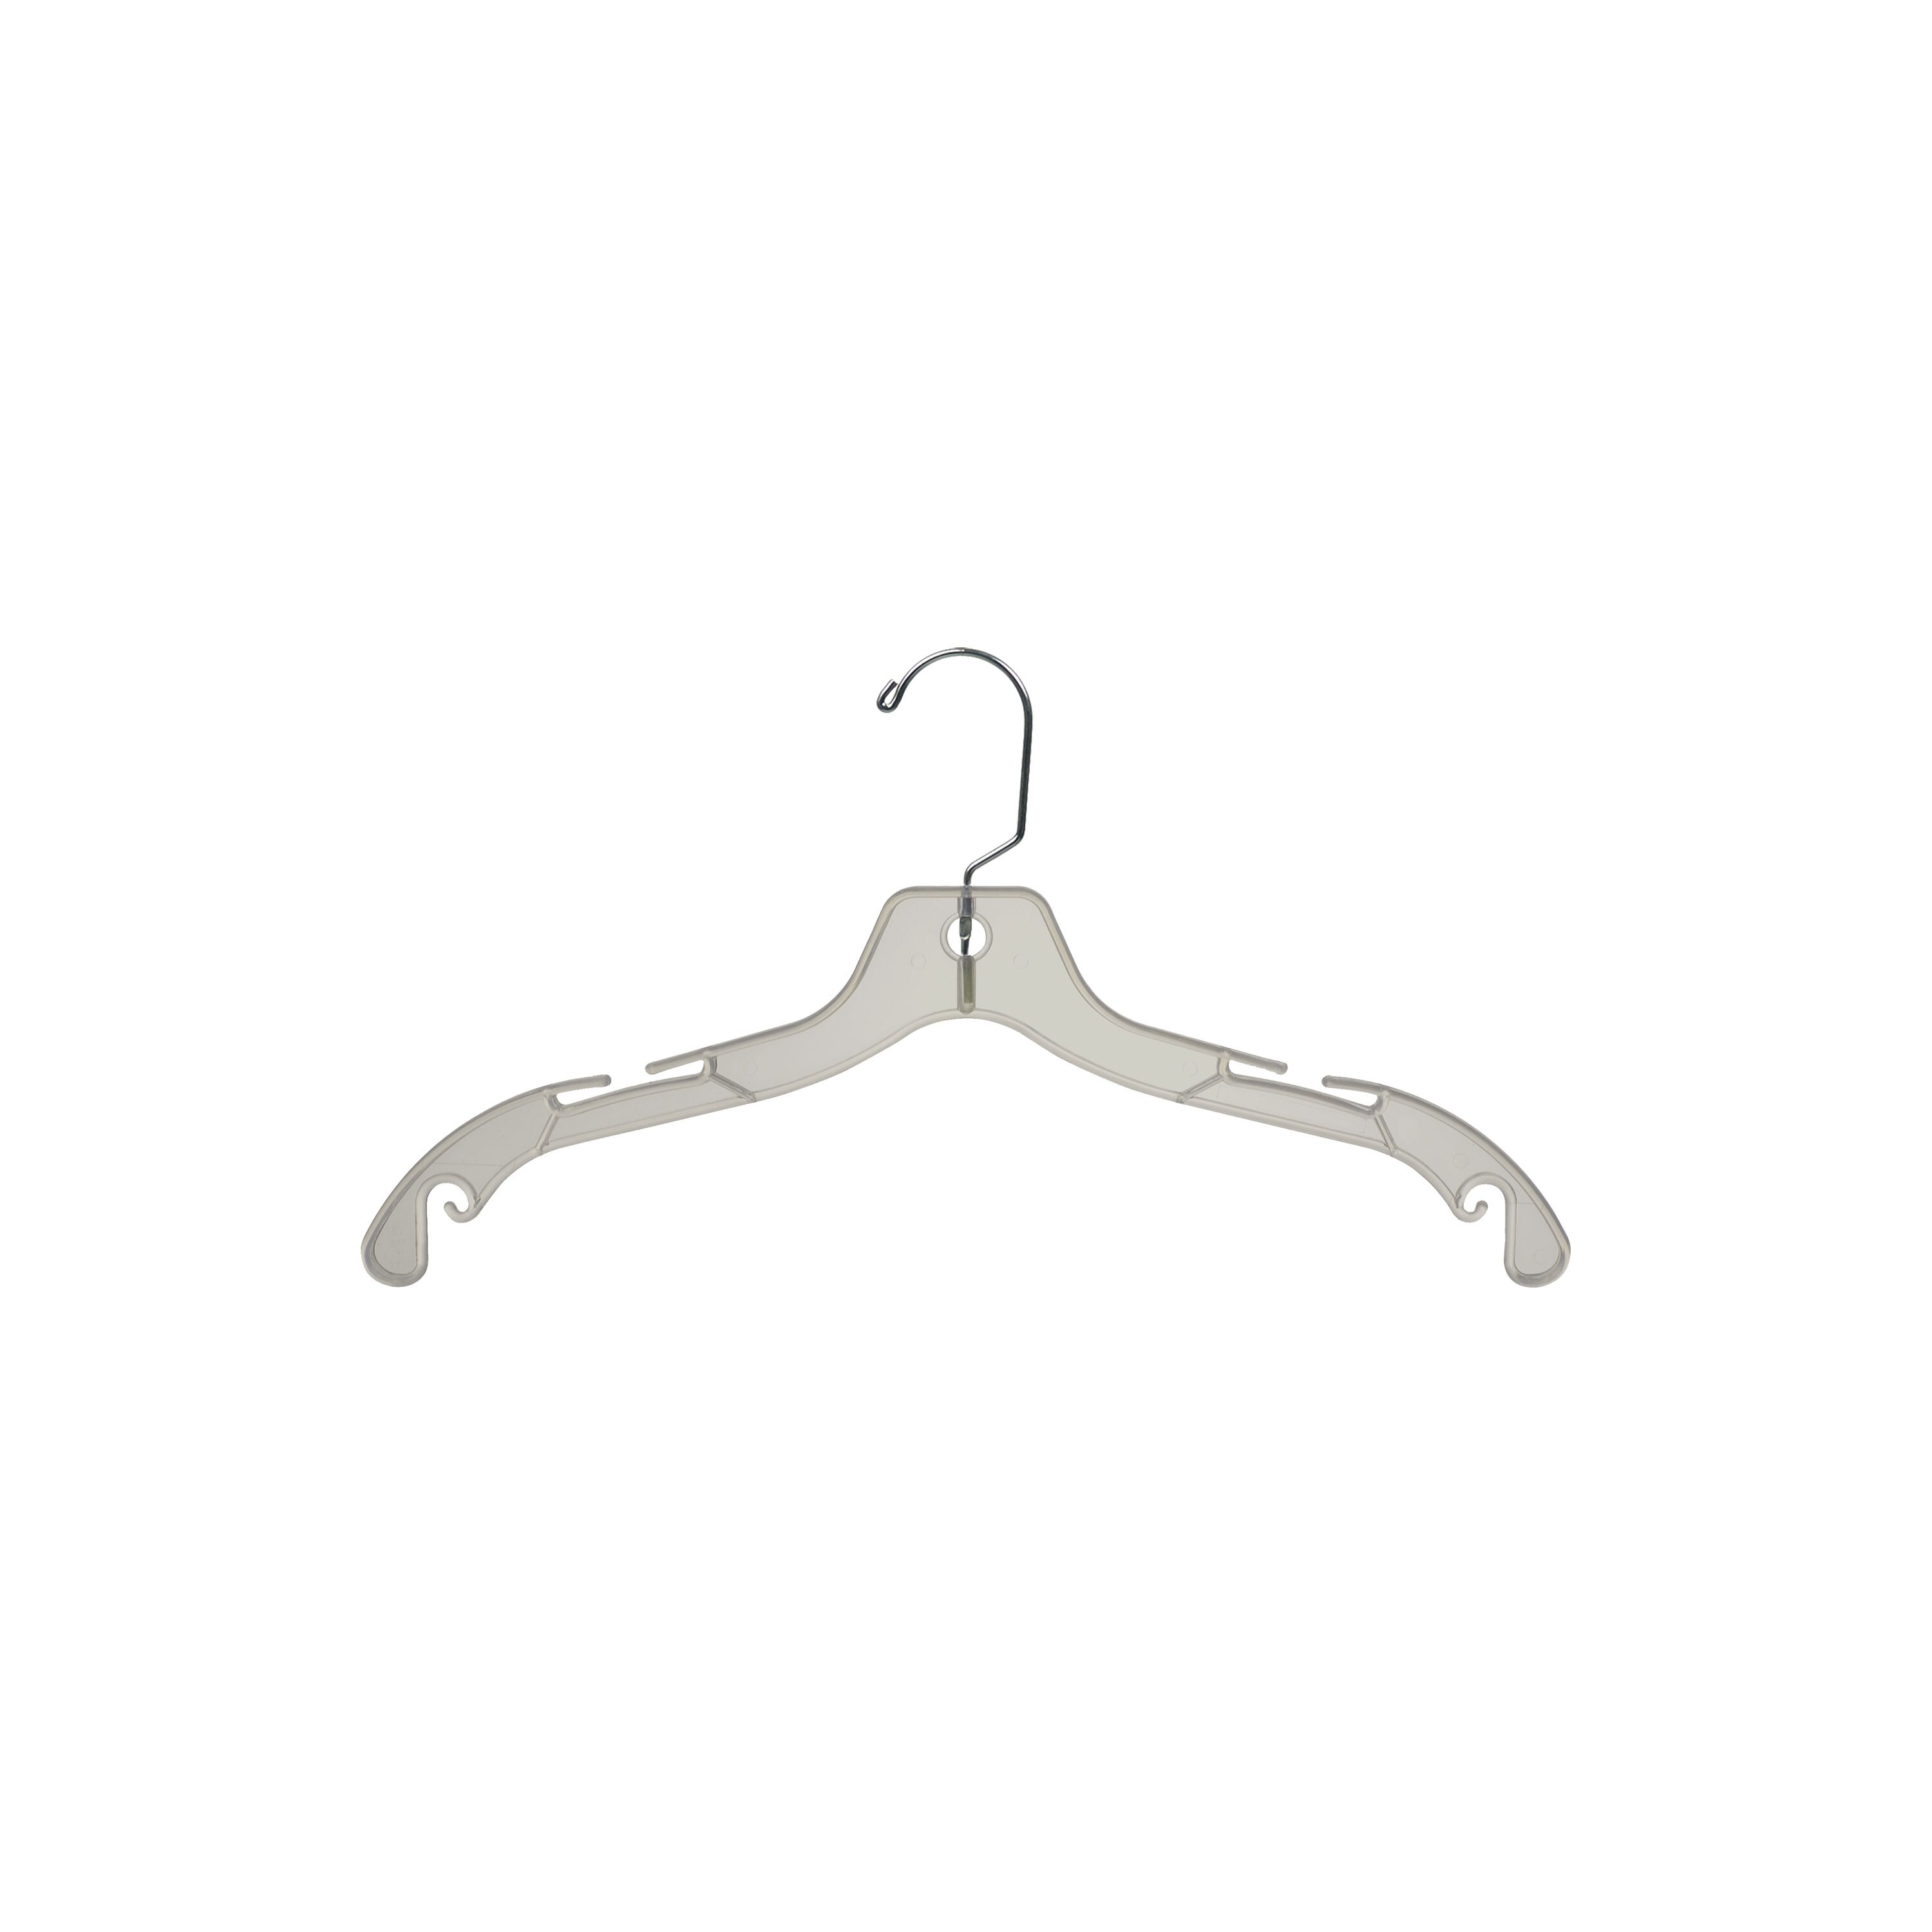 https://ak1.ostkcdn.com/images/products/is/images/direct/b9c7a06e7f179dbe2a2db4ad0d6ce4dc41dd7604/Extra-Strong-Clear-Plastic-Top-Hanger-W--Notches%2C-17%22-Length-X-7-16%22-Thick%2C-Chrome-Hook-Box-of-25.jpg